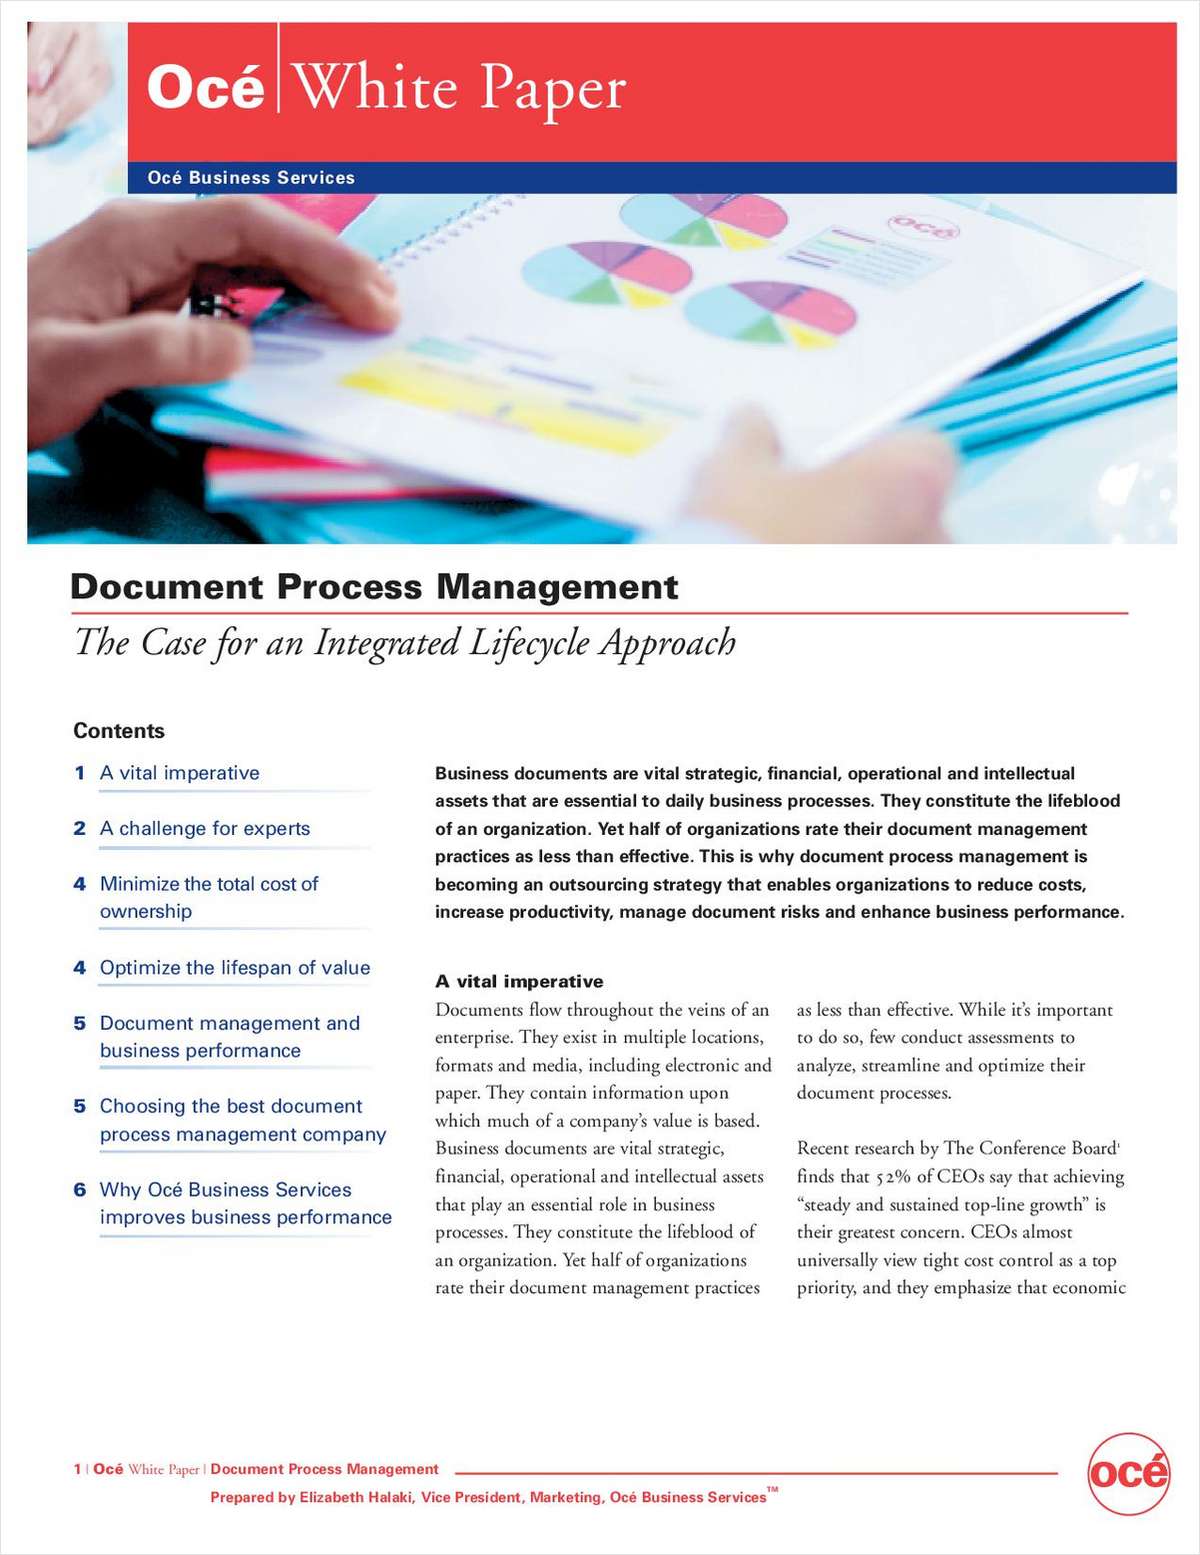 Document Process Management: The Case for an Integrated Lifecycle Approach